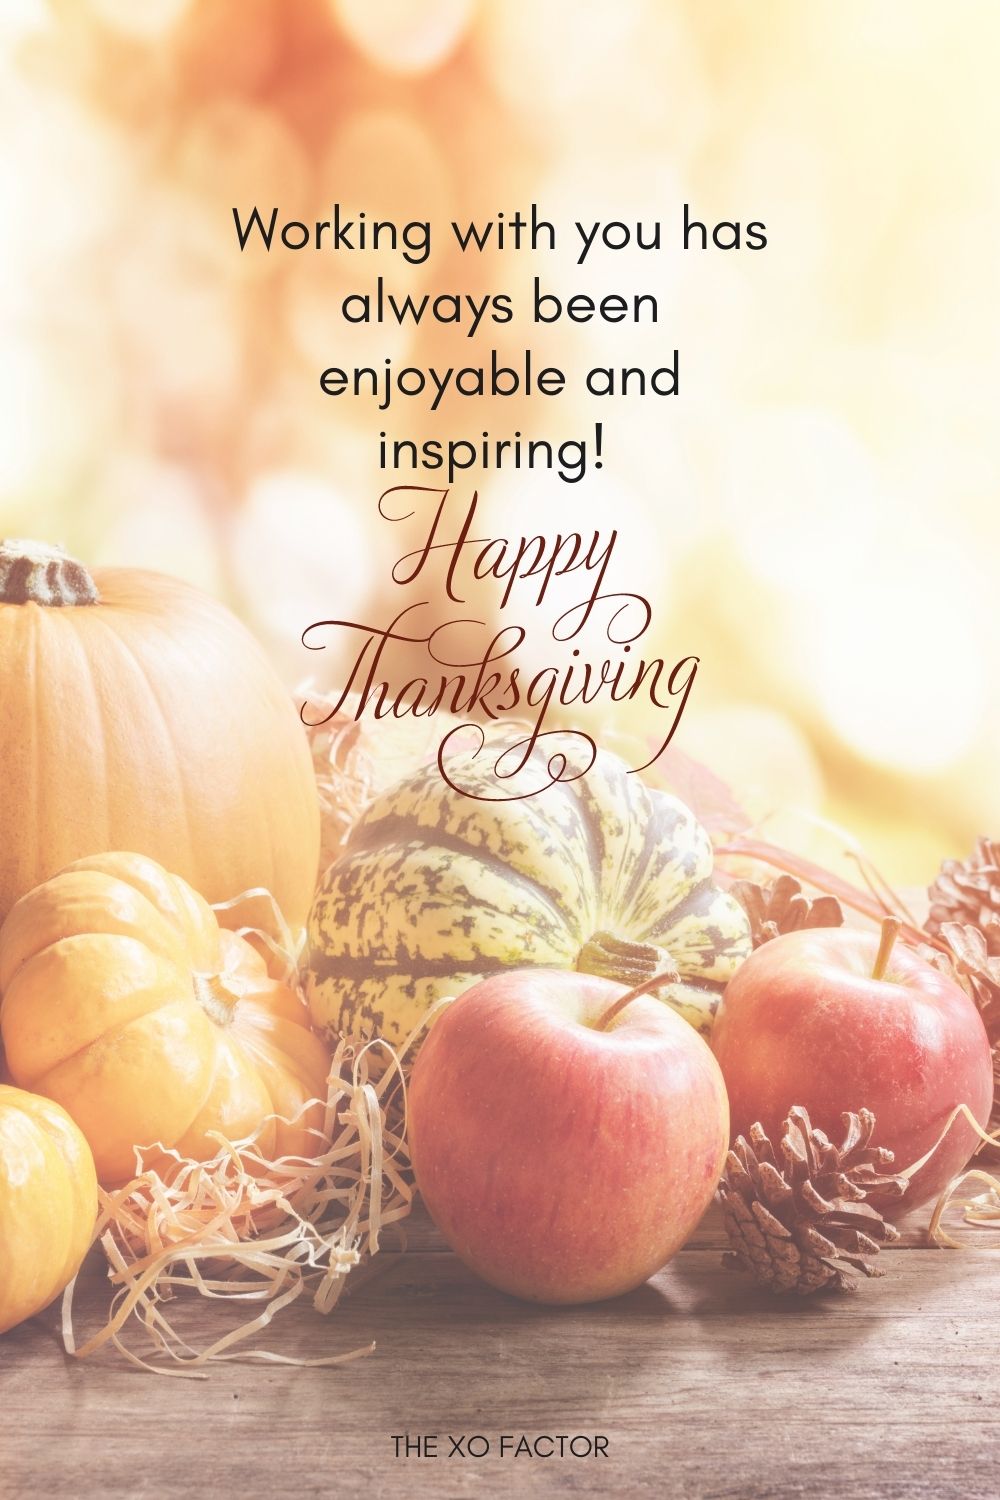 Working with you has always been enjoyable and inspiring! Happy Thanksgiving to you.